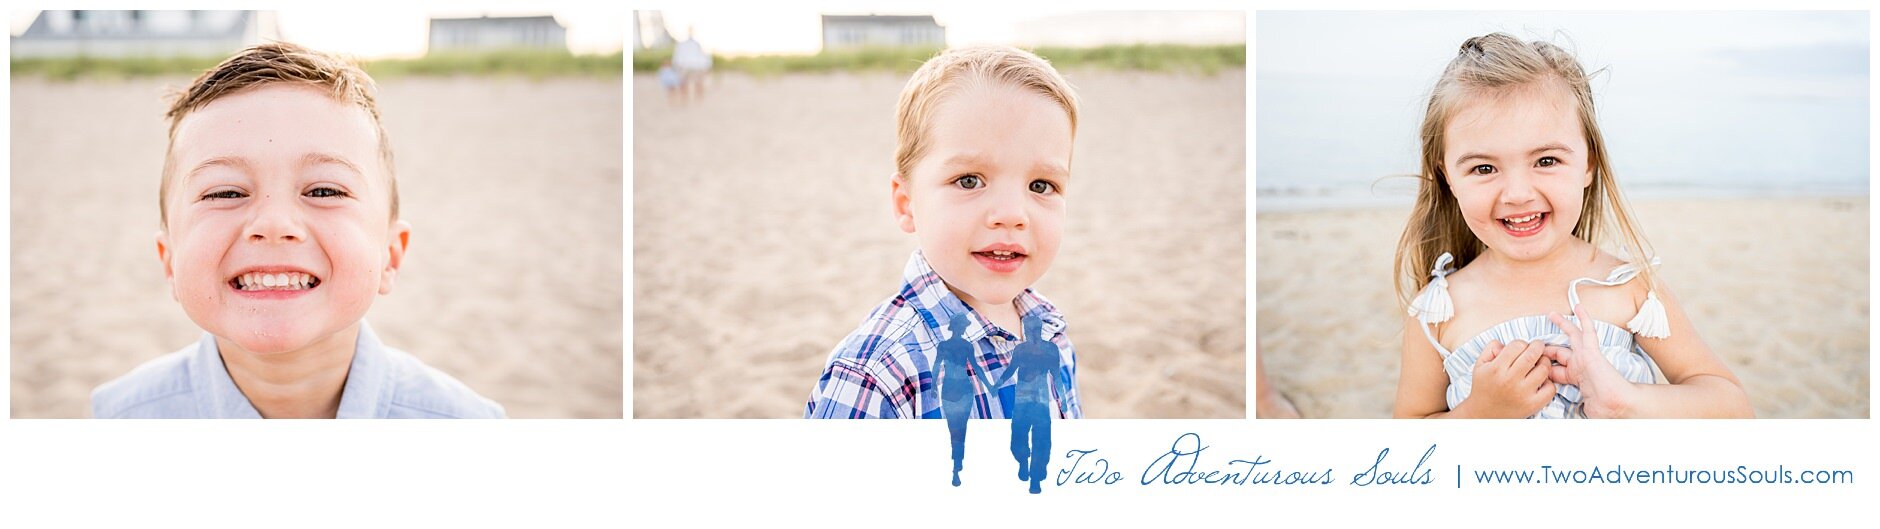 Old Orchard Beach Family Photographer, Maine Family Photographers, Two Adventurous Souls-081521_0013.jpg